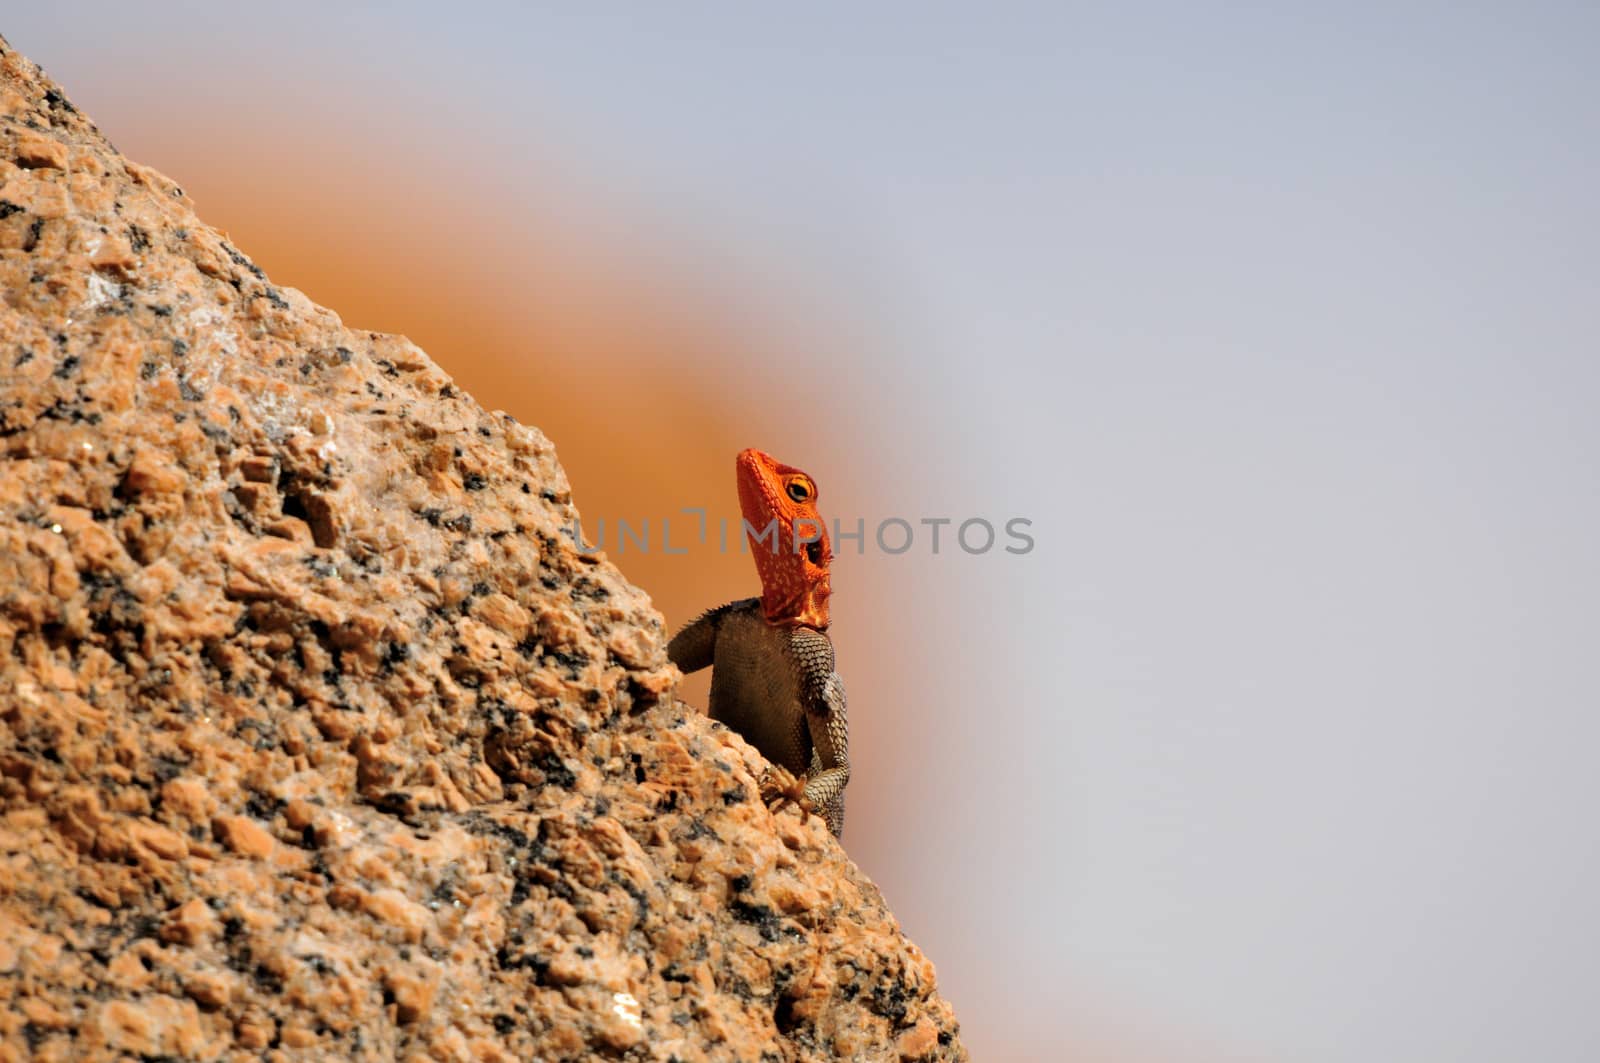 Agama planiceps at the greater Spitzkoppe, Namibia